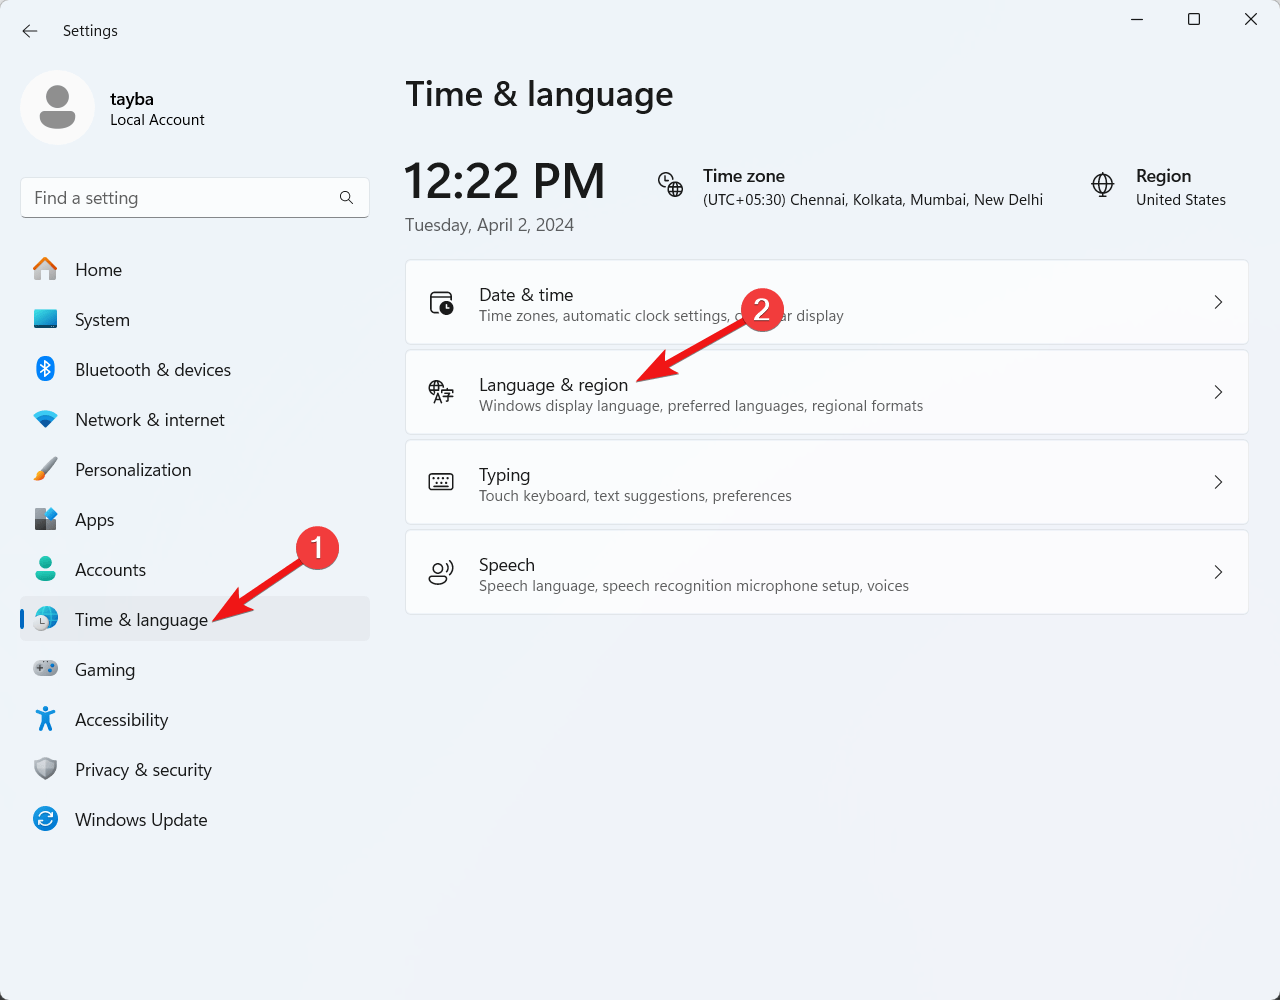 Choose time and language and then language and region